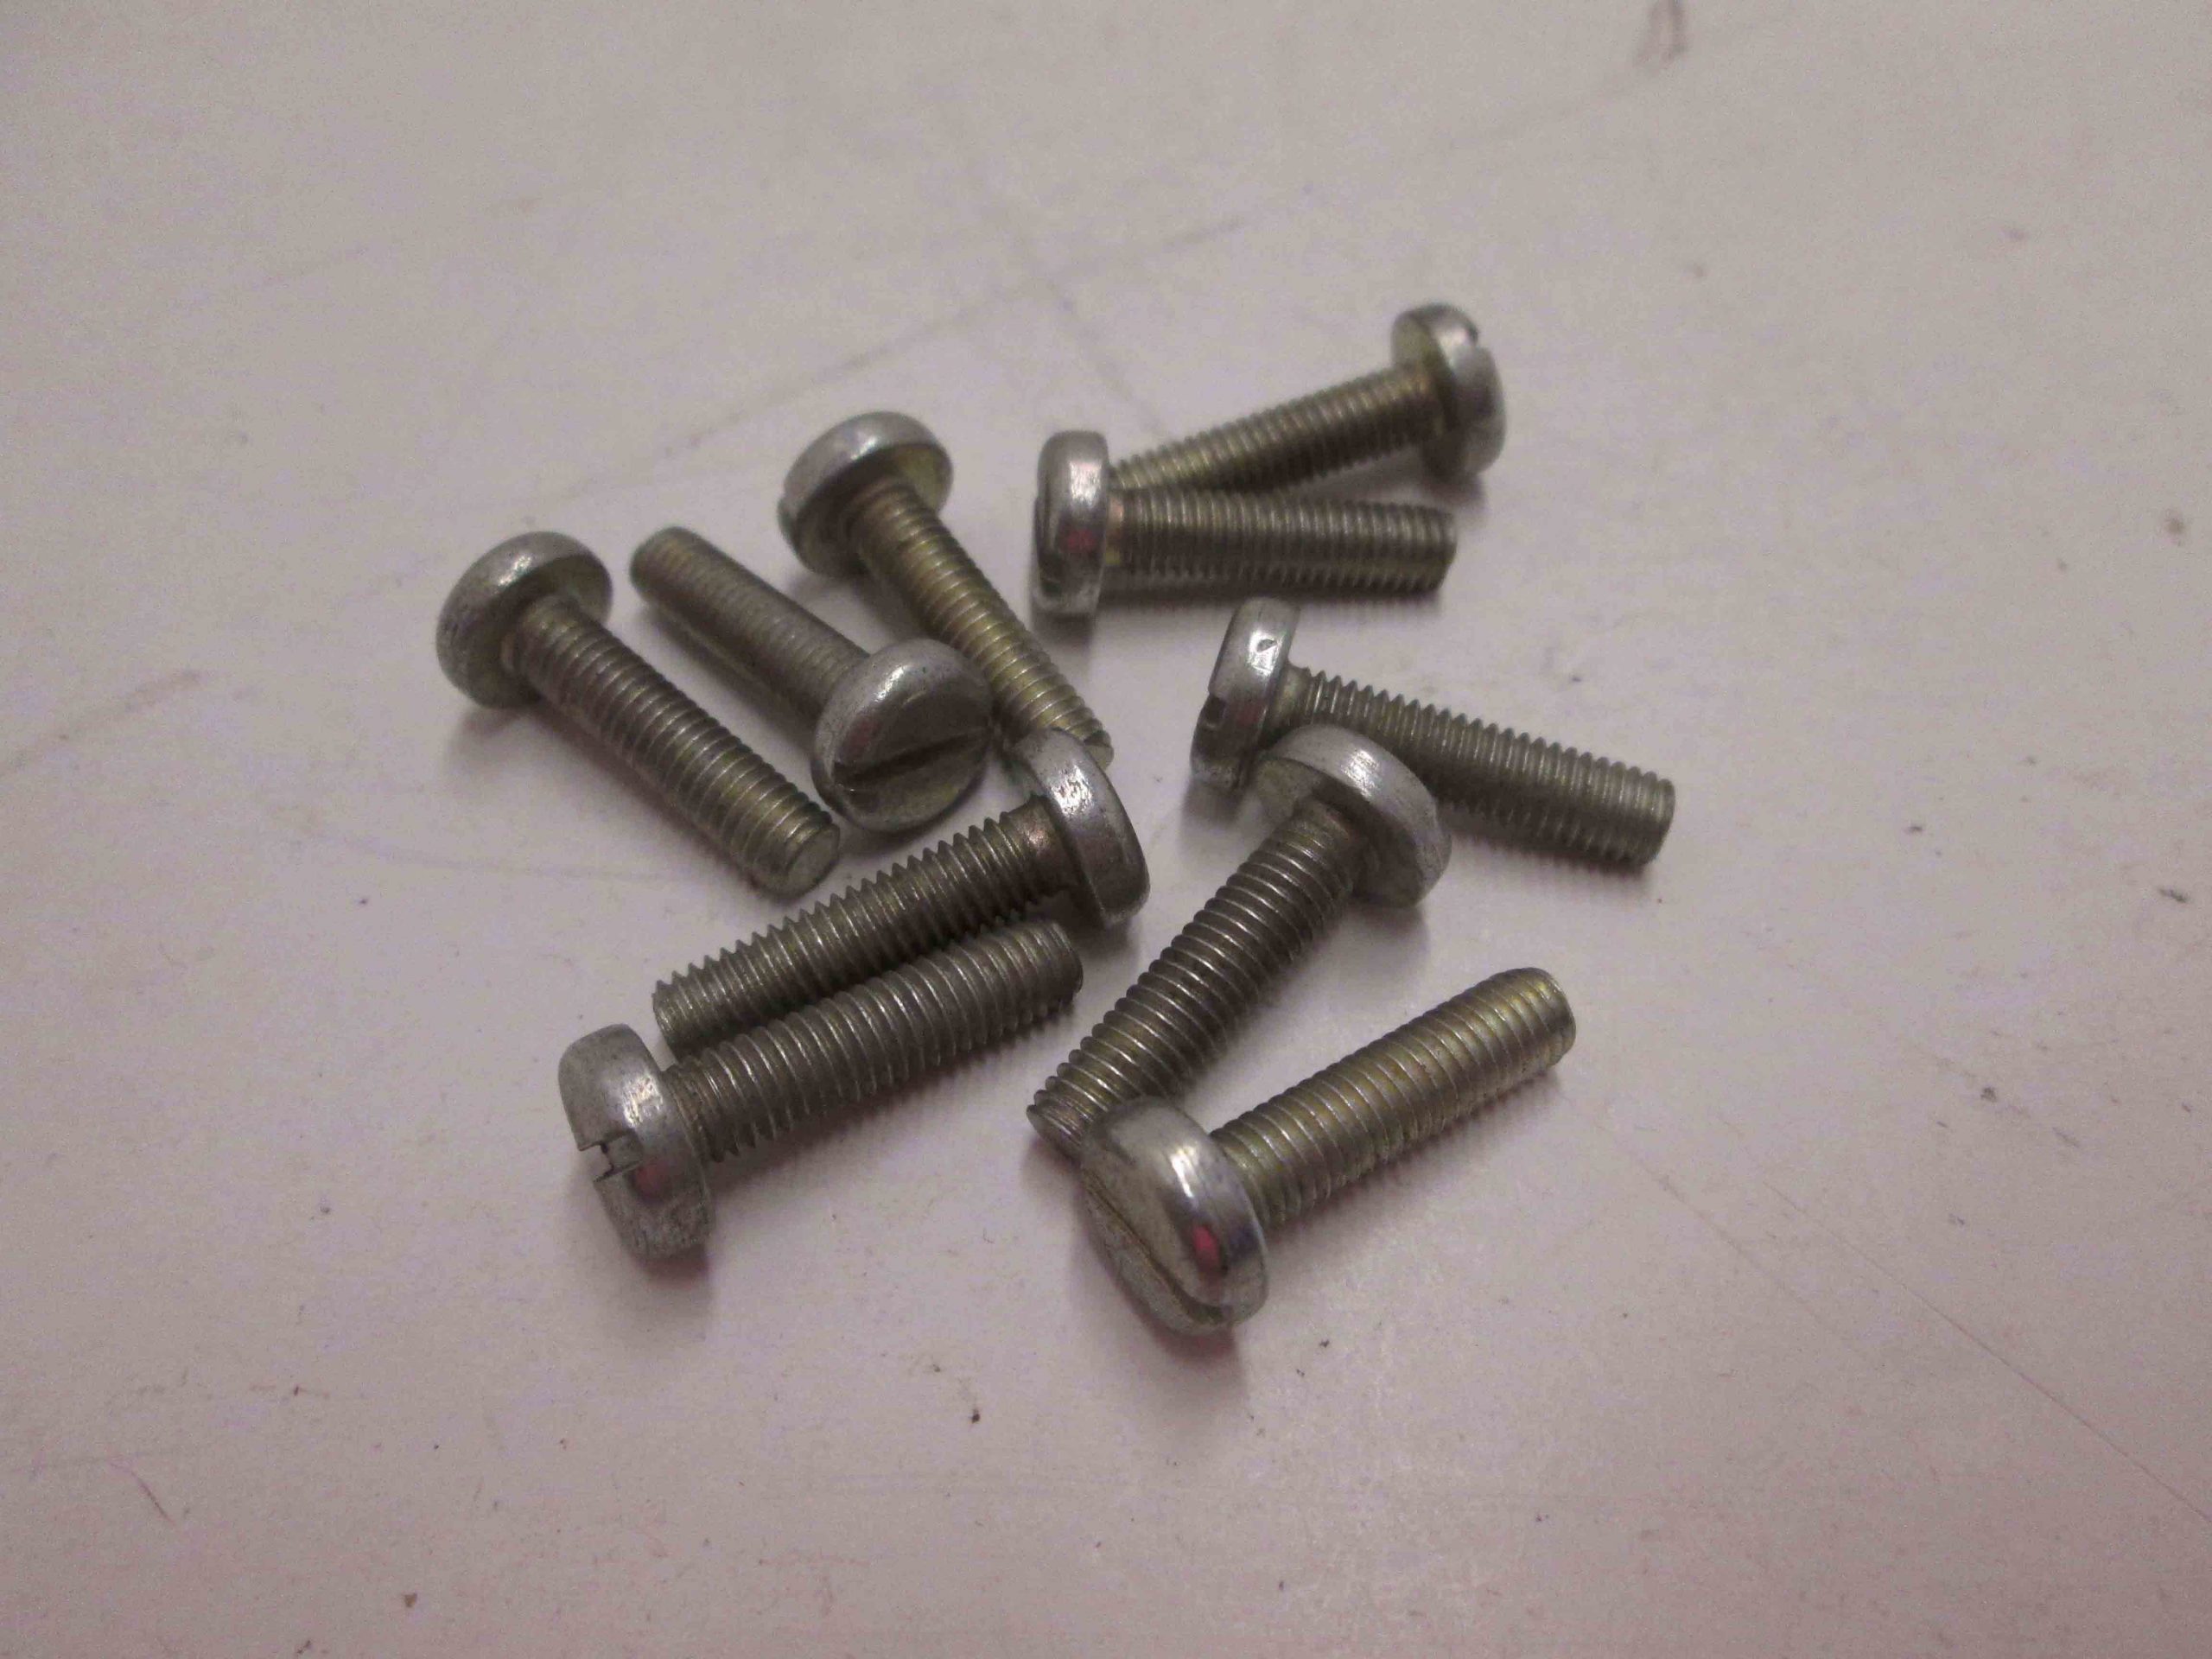 PAN HD. SLOTTED MACH SCREW 5MMX20MM PK OF 10